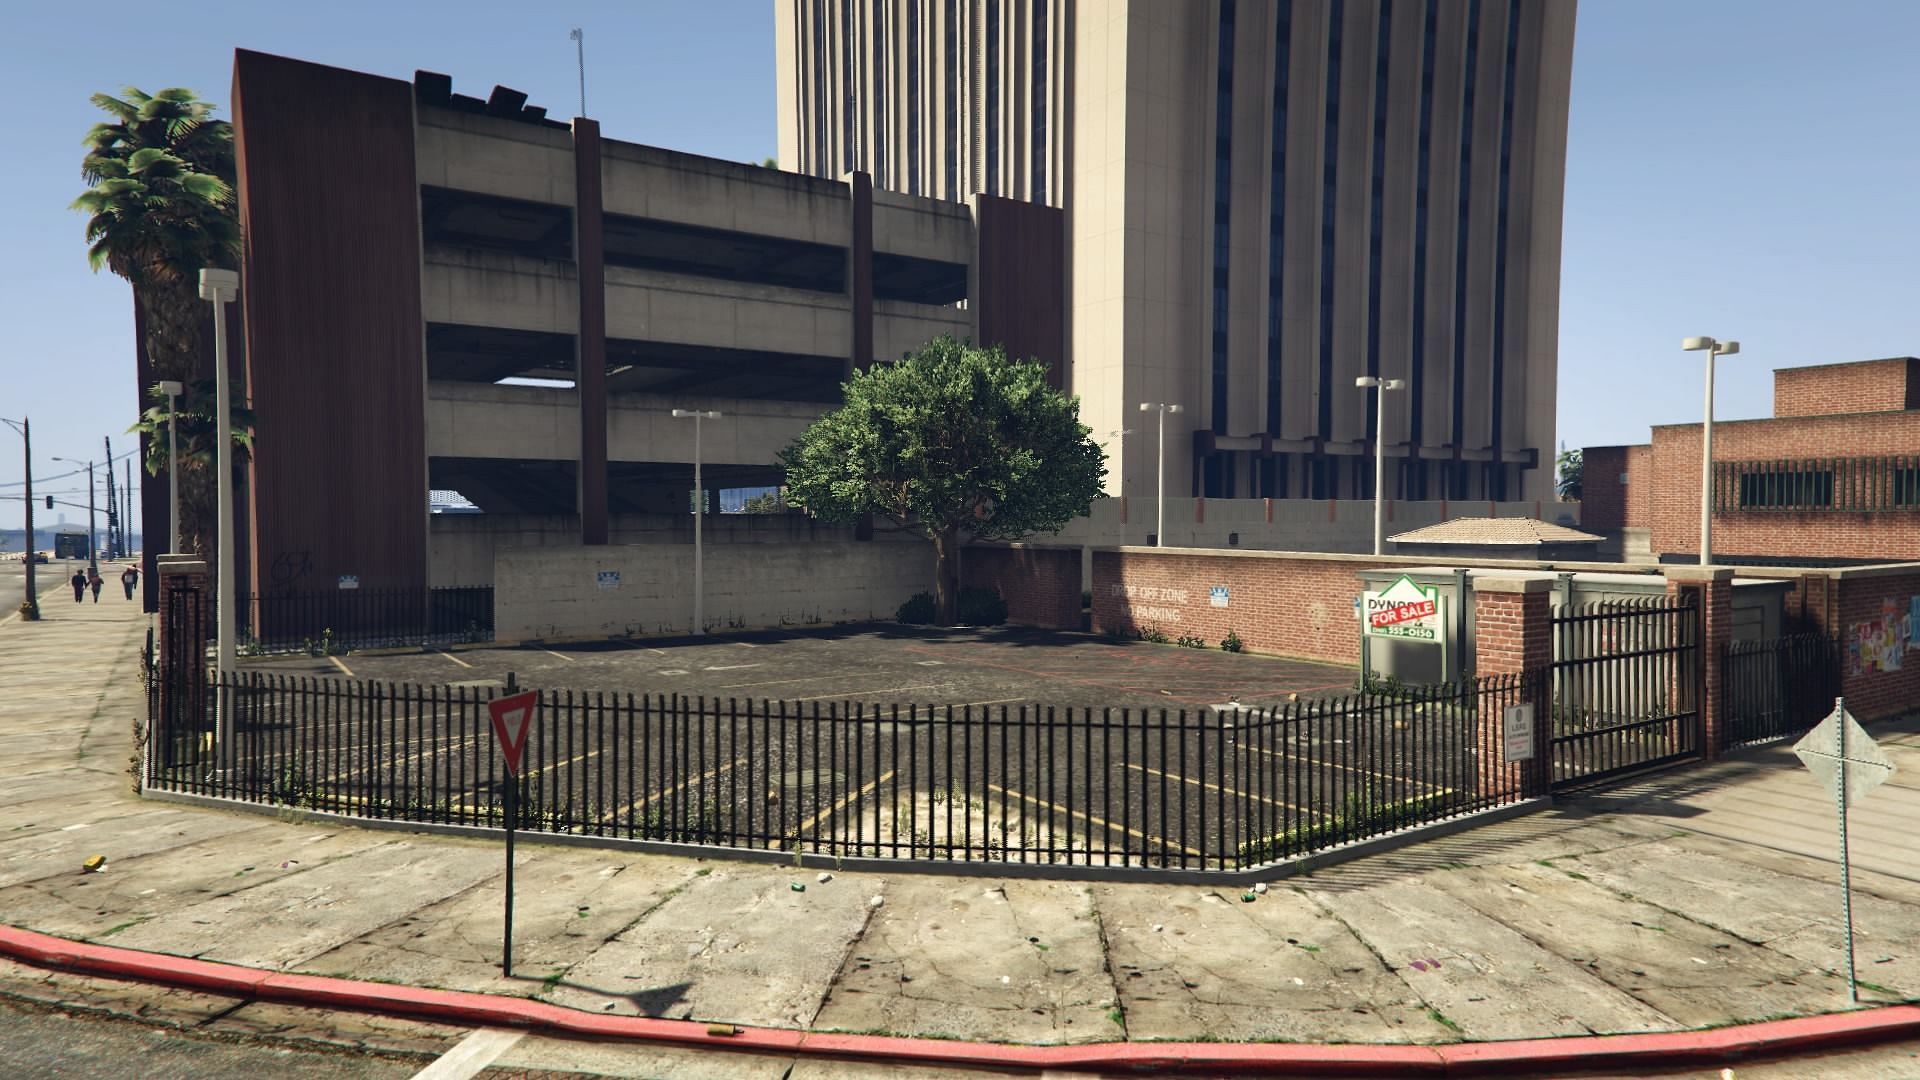 LSPD Auto Impound is a cheap property to buy, only costing $150,000 (Image via Rockstar Games)